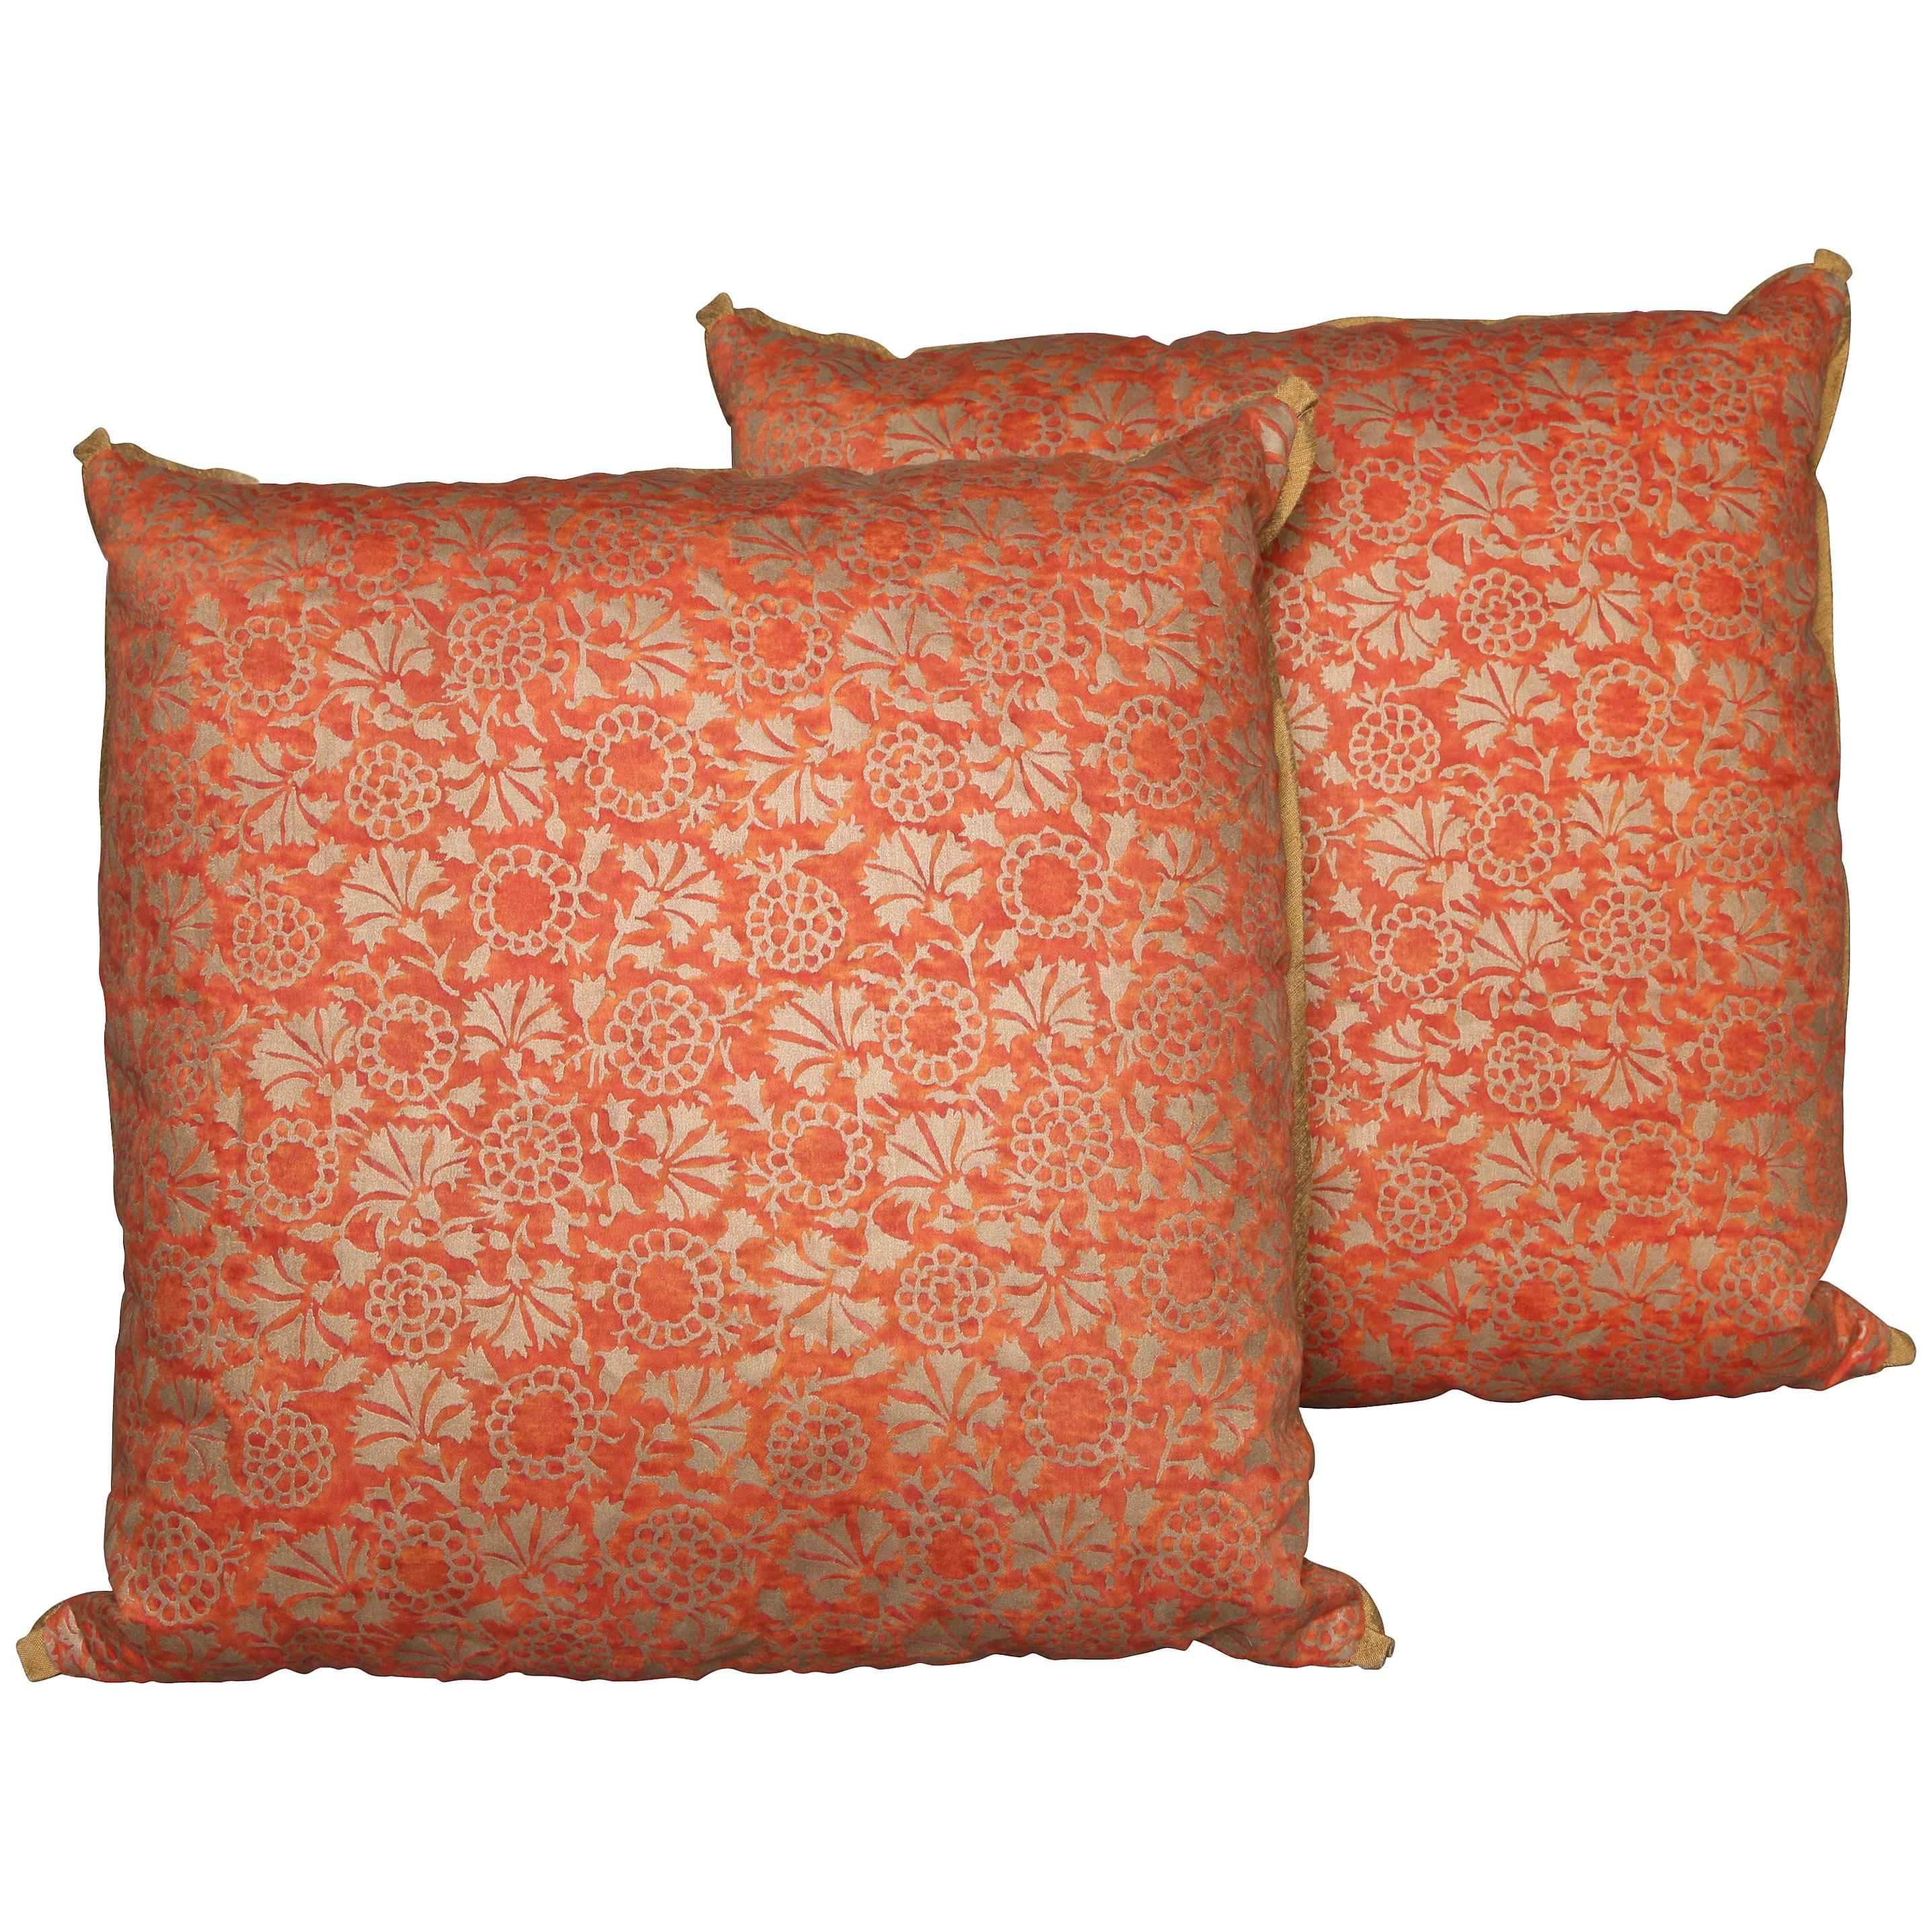 Pair of Fortuny Fabric Cushions in the Irani Pattern